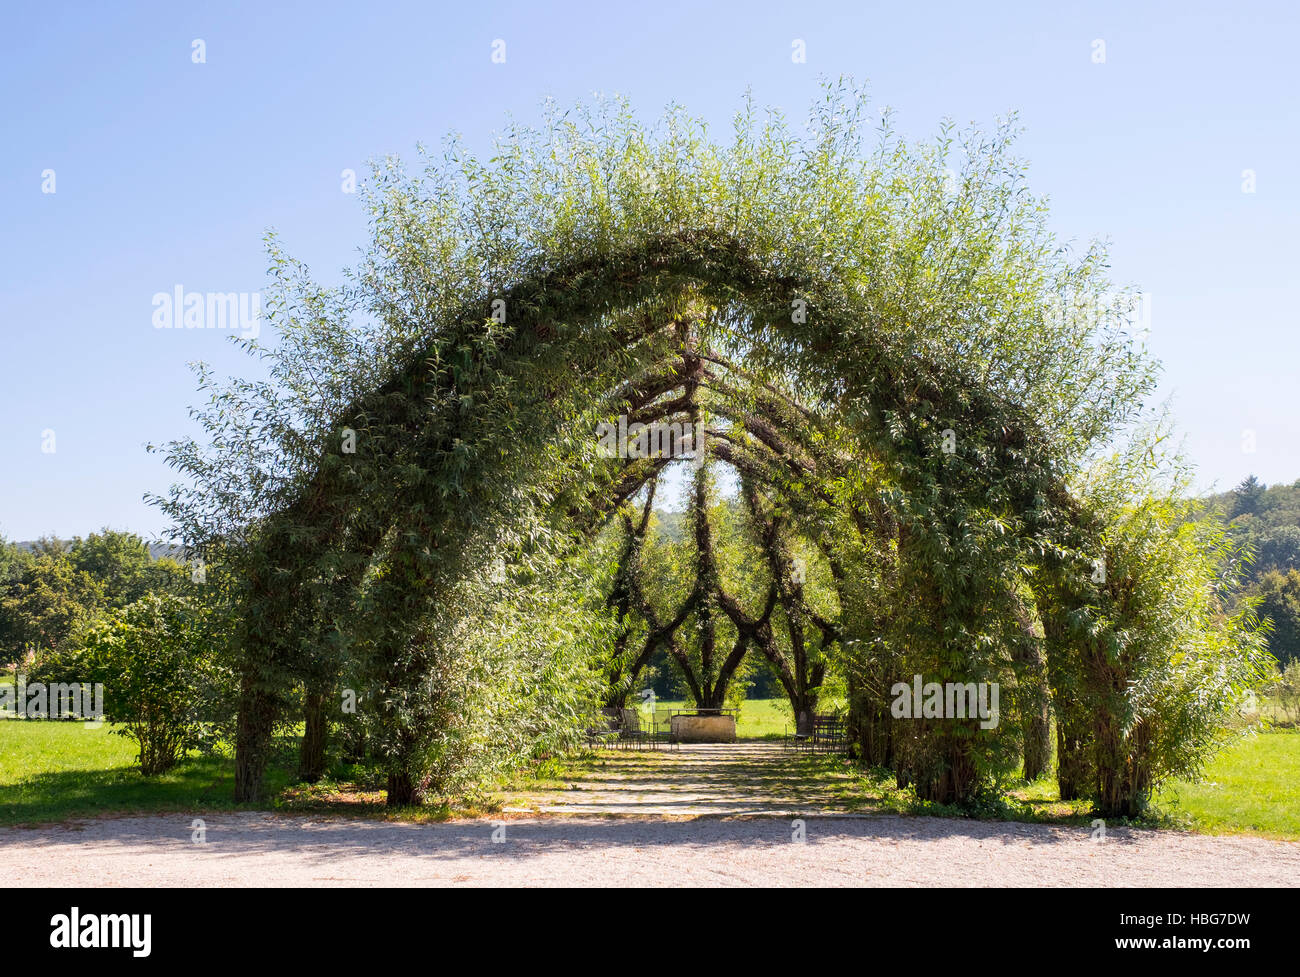 Weidenkirche, living willow structure, church, Pappenheim, Altmühltal, Middle Franconia, Franconia, Bavaria, Germany Stock Photo